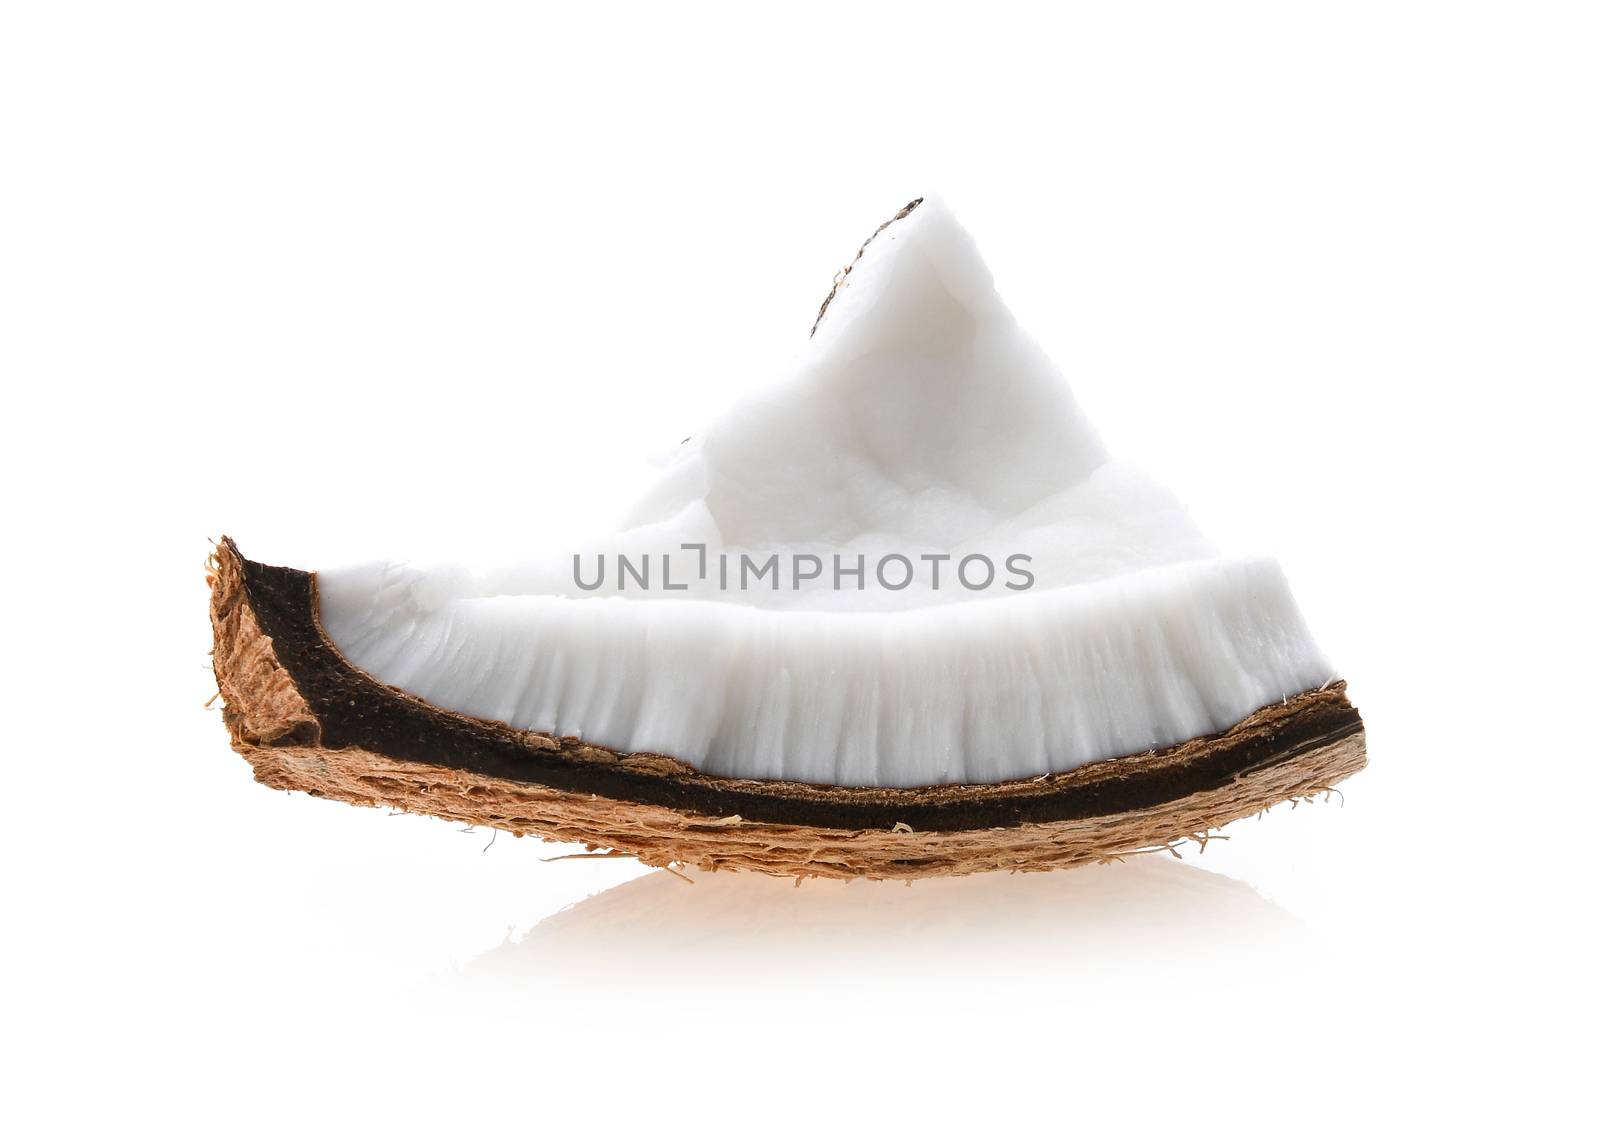 Coconut pieces isolated on a white background by sommai